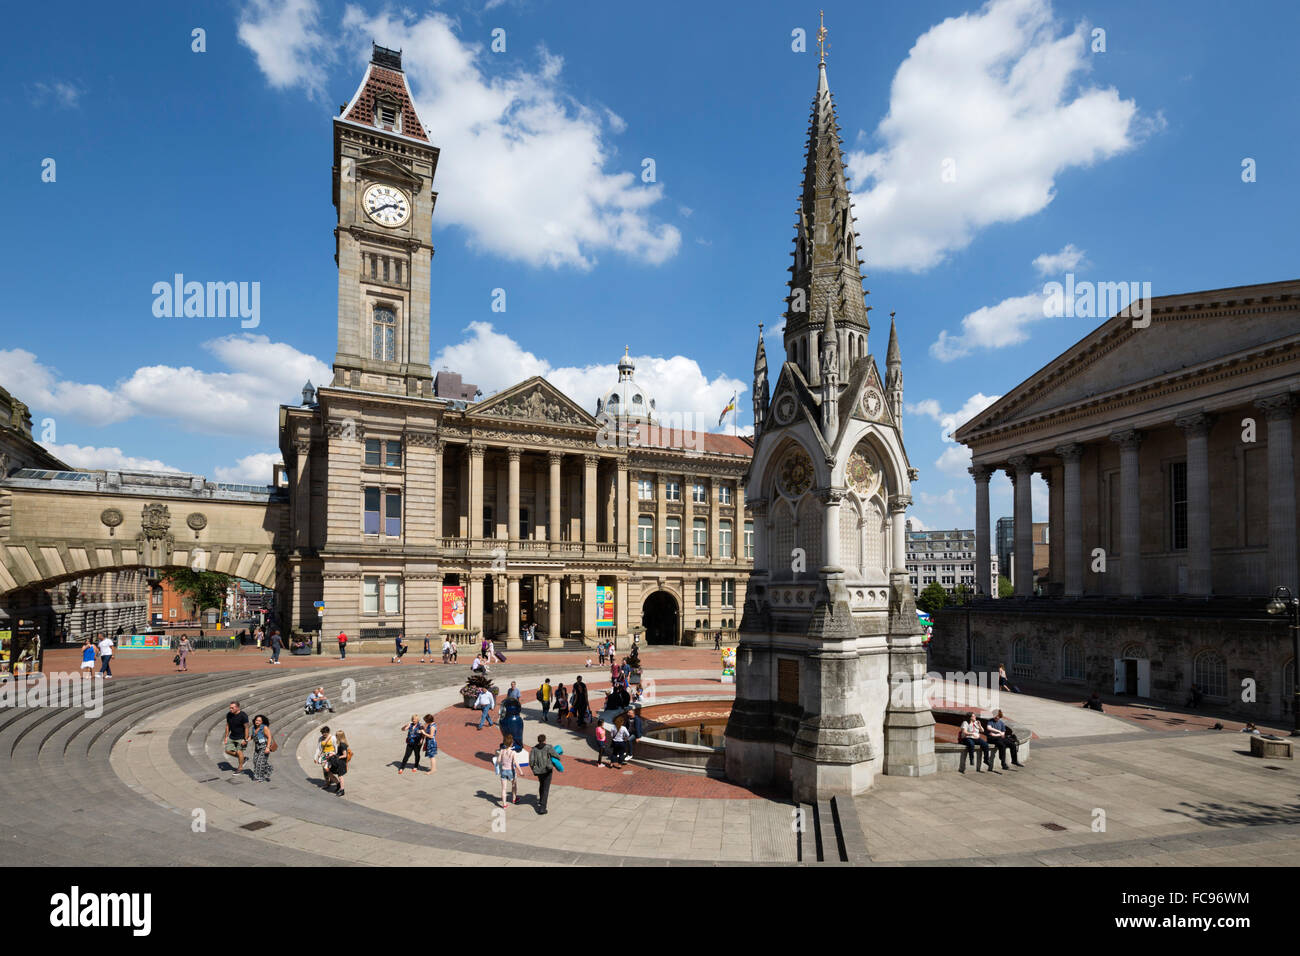 Birmingham Museum and Art Gallery and Town Hall, Chamberlain Square, Birmingham, West Midlands, England, United Kingdom, Europe Stock Photo